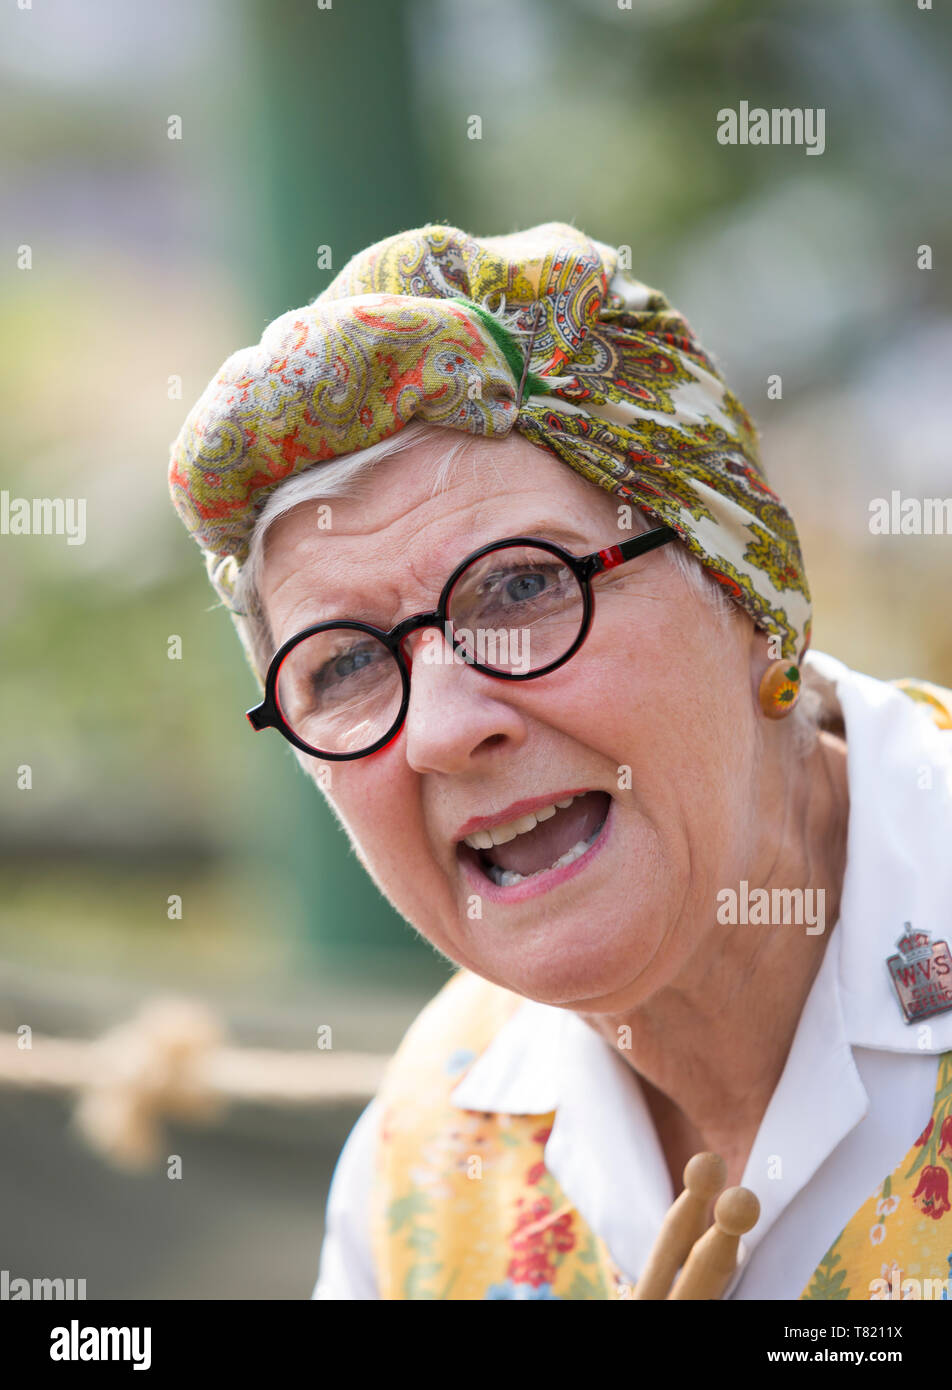 Close-up front view portrait of isolated Caucasian woman in headscarf & overalls as authentic vintage housewife, charlady Mrs Mop at 1940's WWII event. Stock Photo